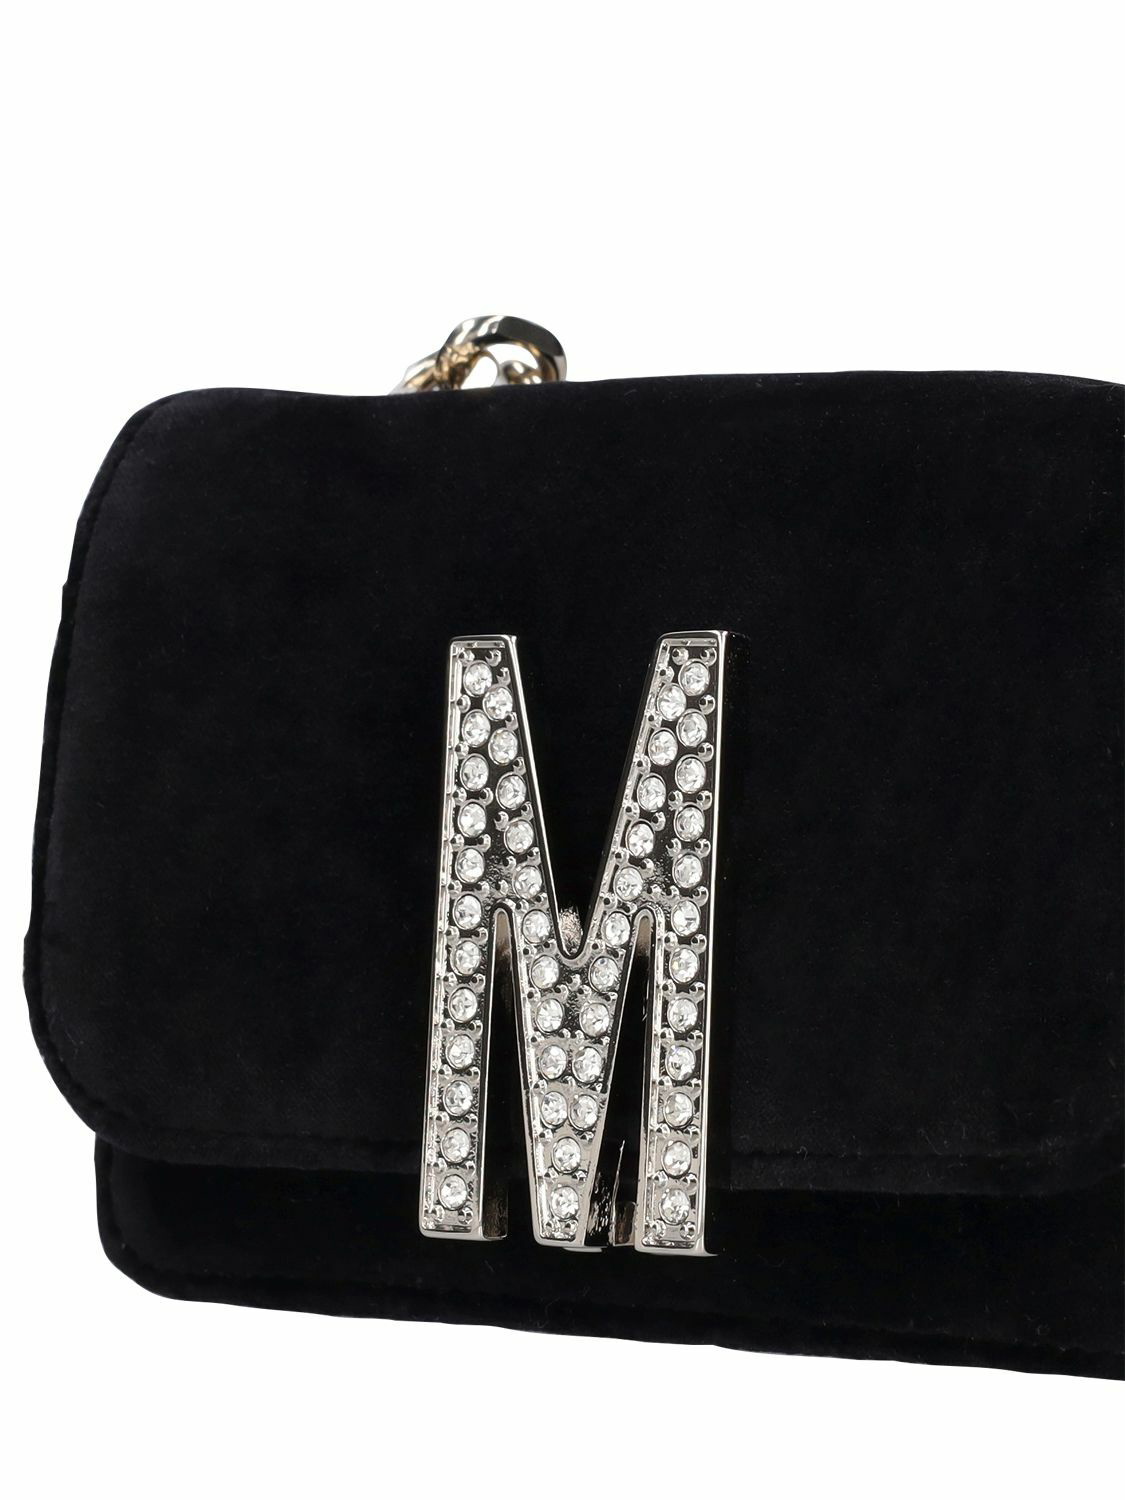 Shop moschino bag for Sale on Shopee Philippines